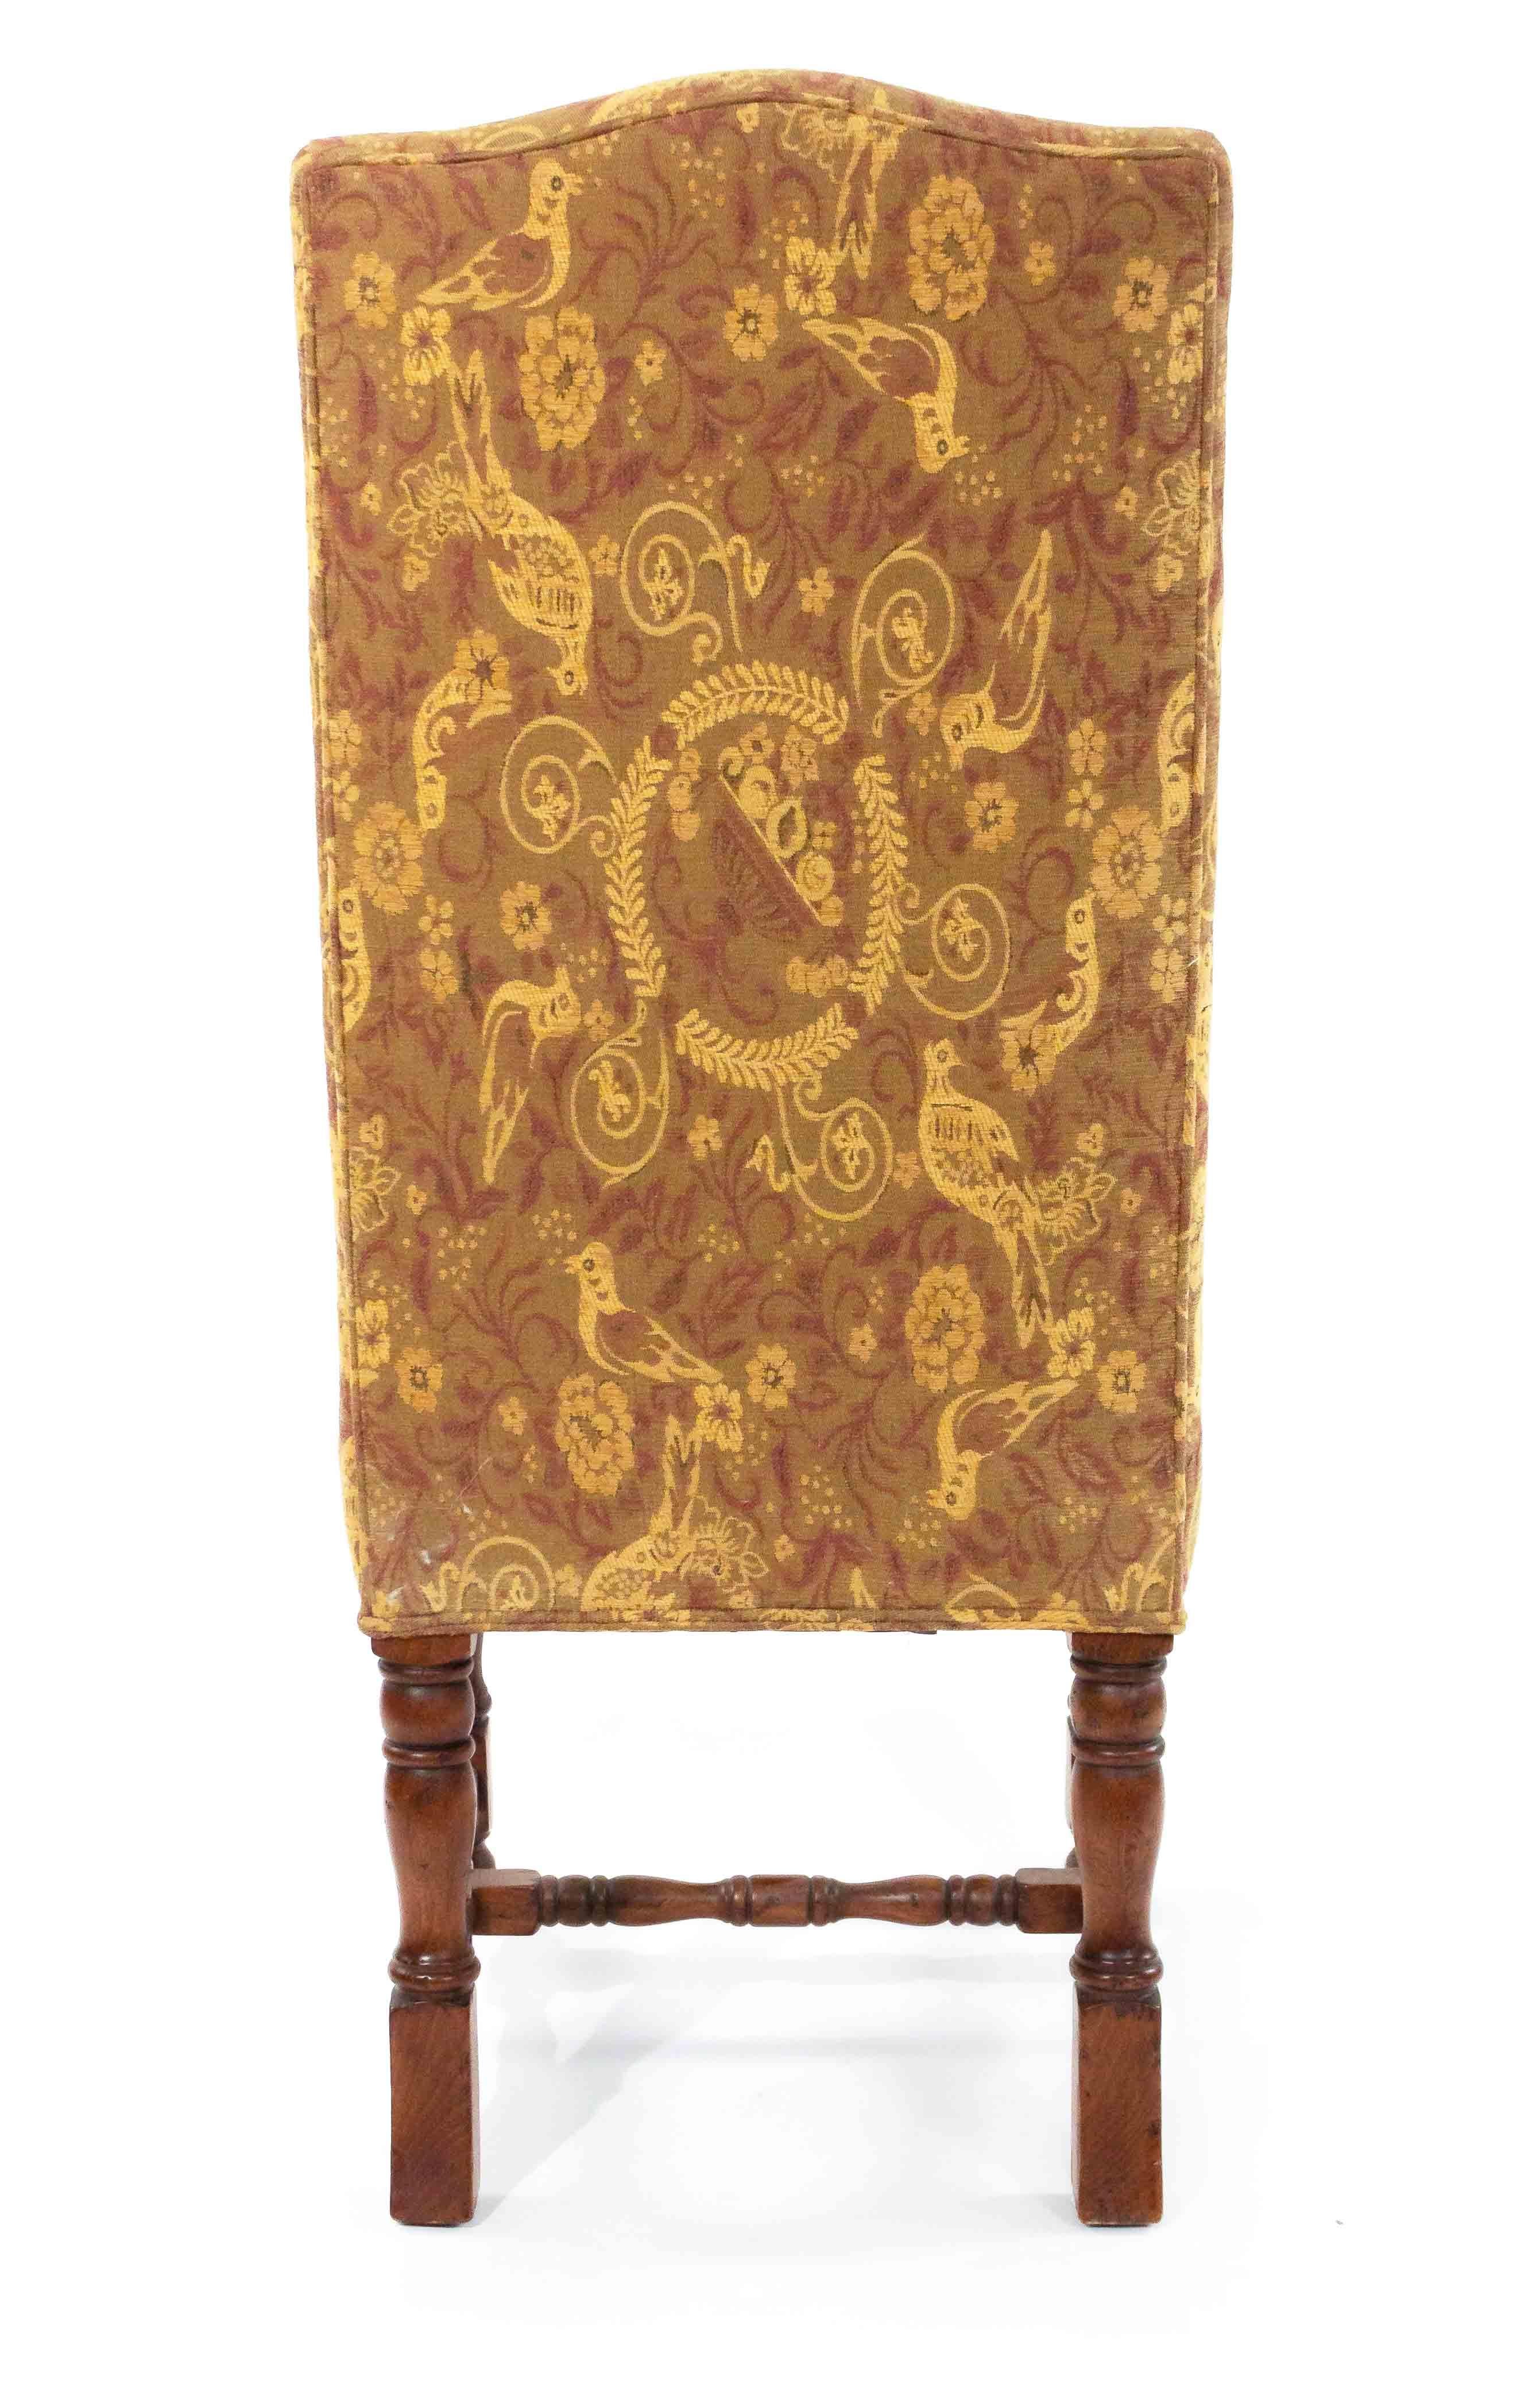 20th Century High Back Renaissance Style Dining Chairs with Floral Upholstery